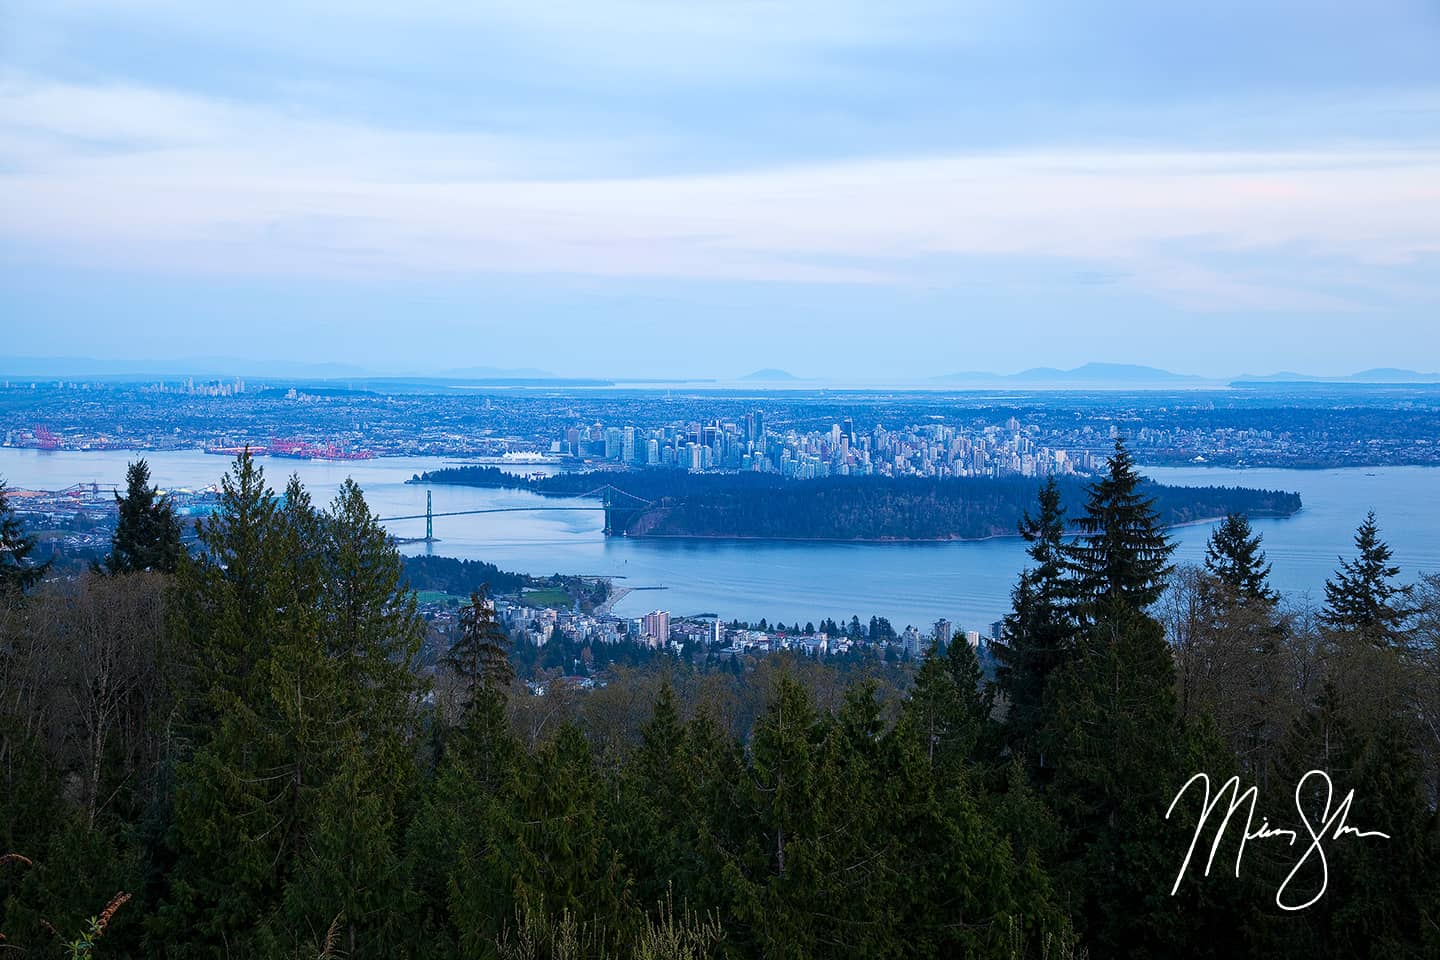 Vancouver Sunset - Cypress Mountain, North Vancouver, British Columbia, Canada